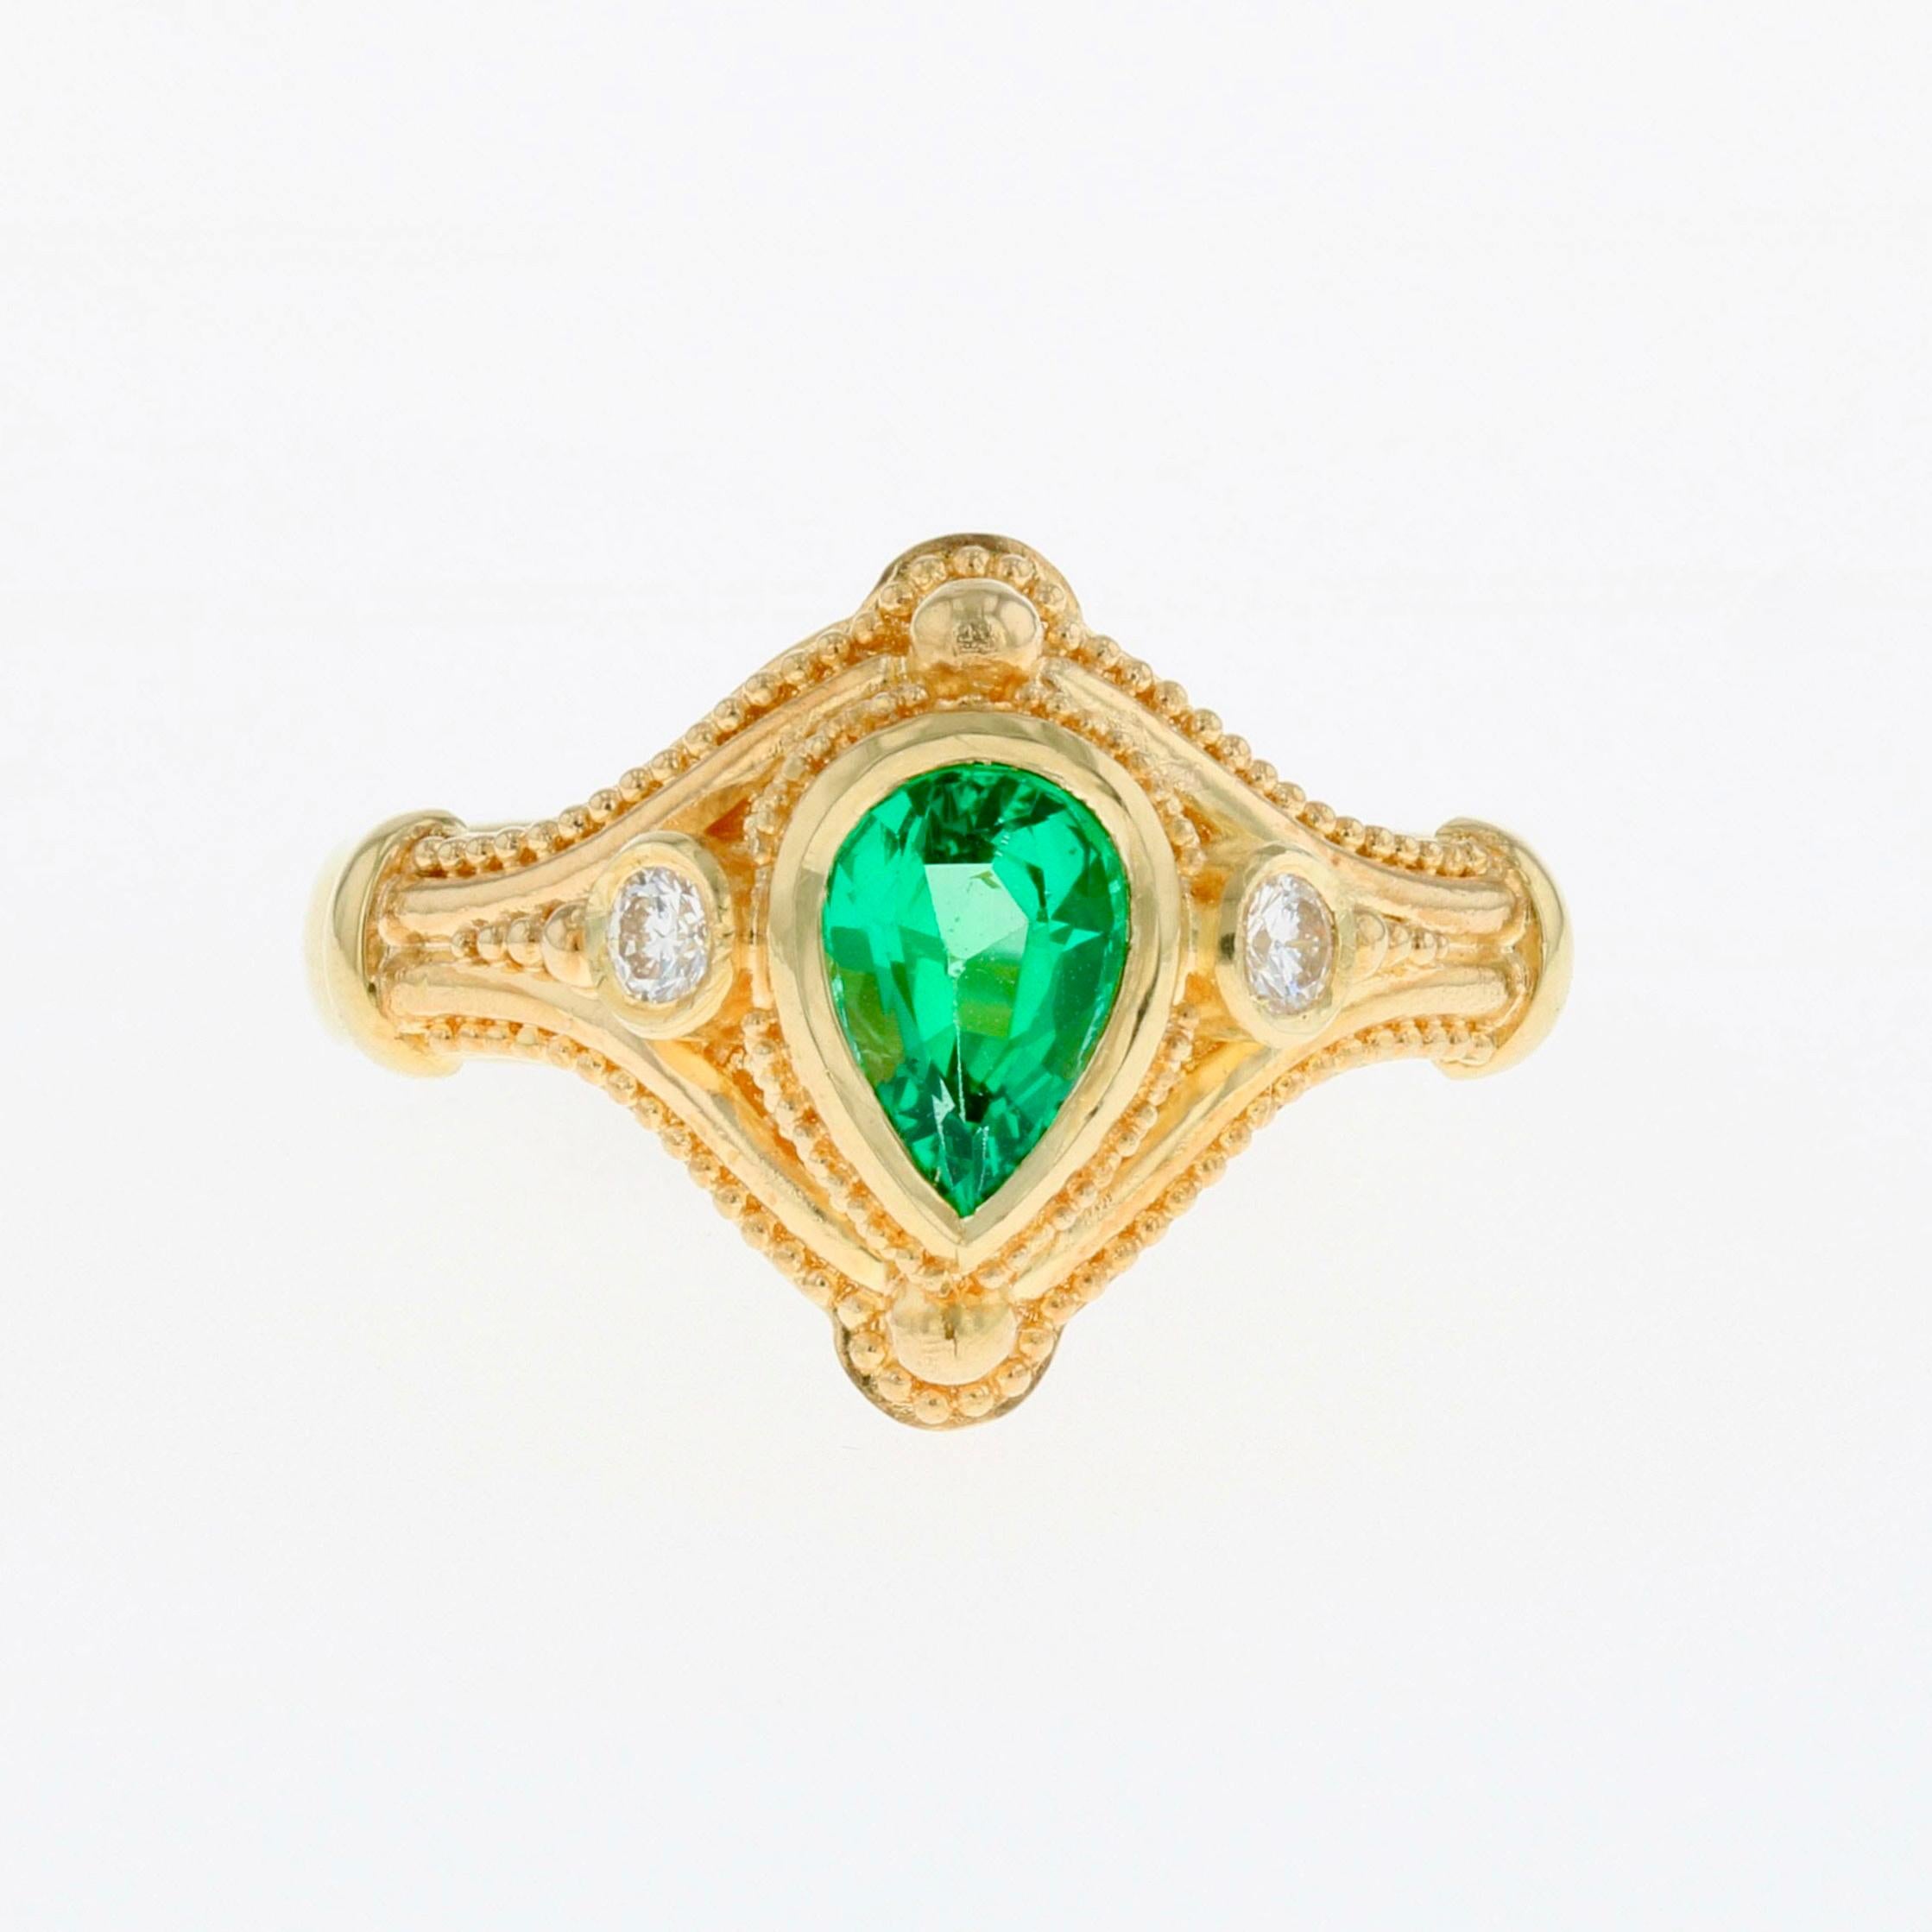 From the Kent Raible limited edition 'Studio Collection' we have a lovely .64 carat pear shaped Emerald with Diamonds set in 18 karat gold and fine granulation.

The classic style of this 'Tear Drop Ring' is lovely set with any gemstone of your